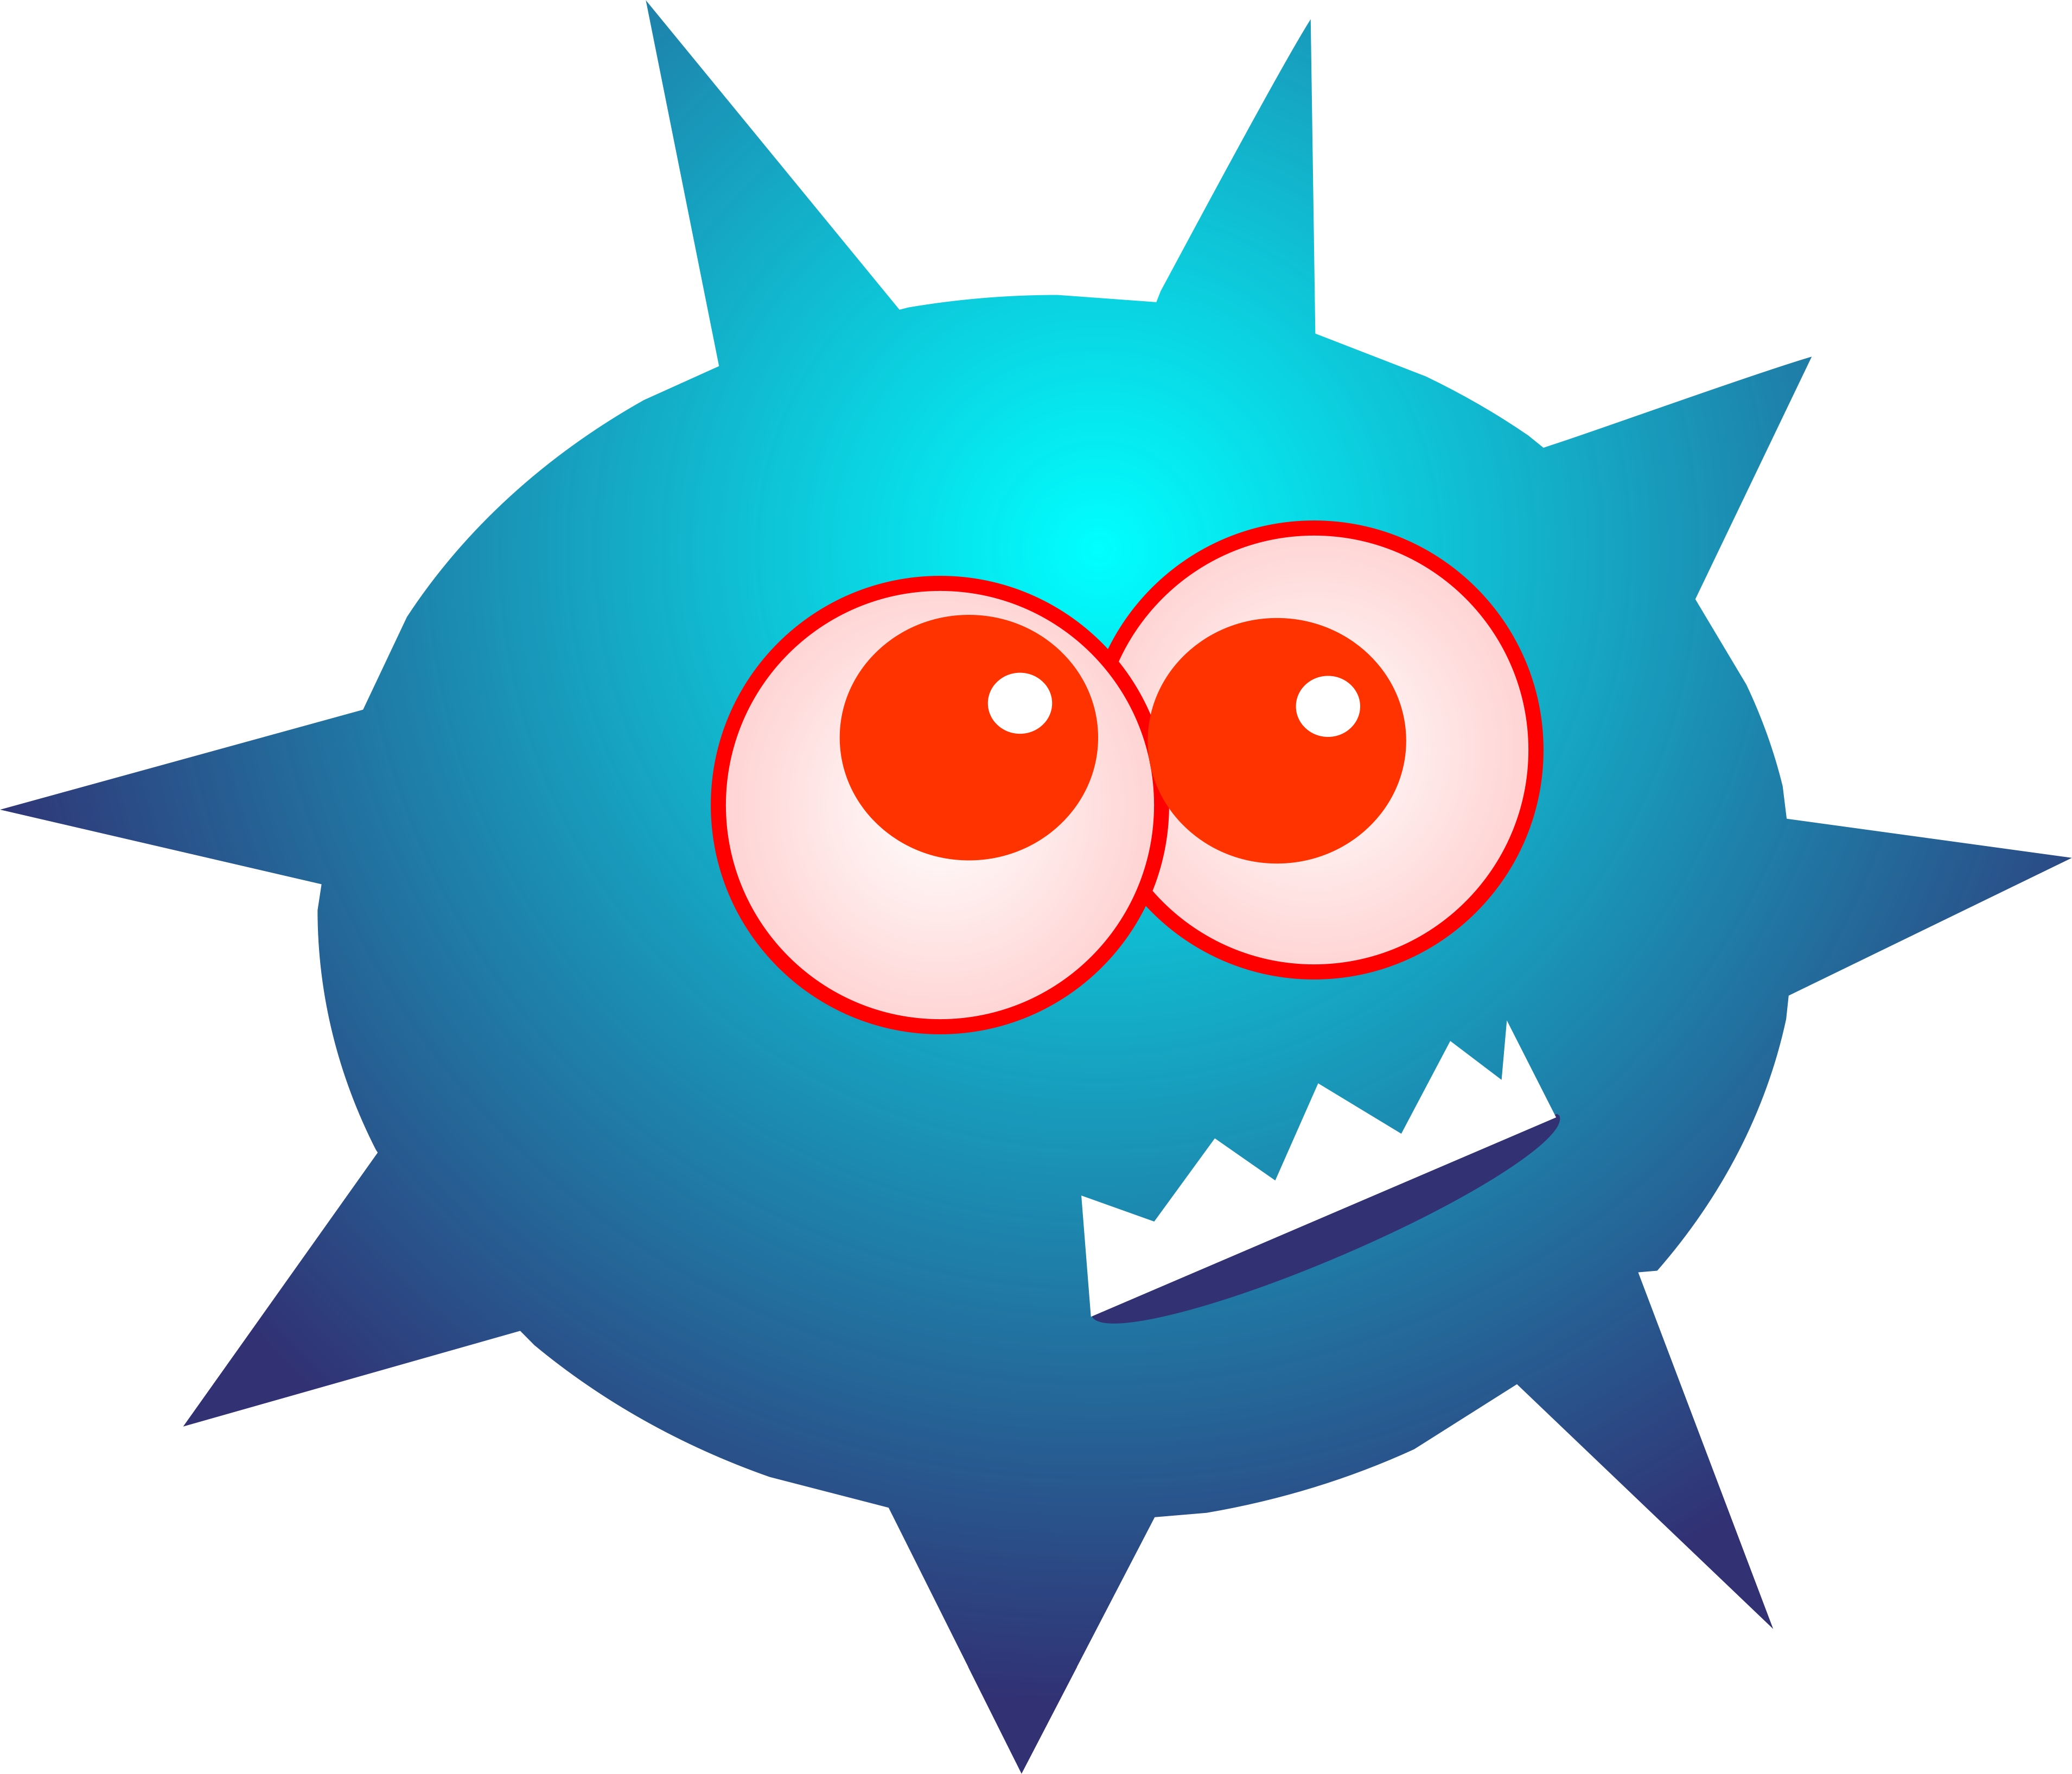 Free Computer Virus Clipart, Download Free Clip Art, Free ...